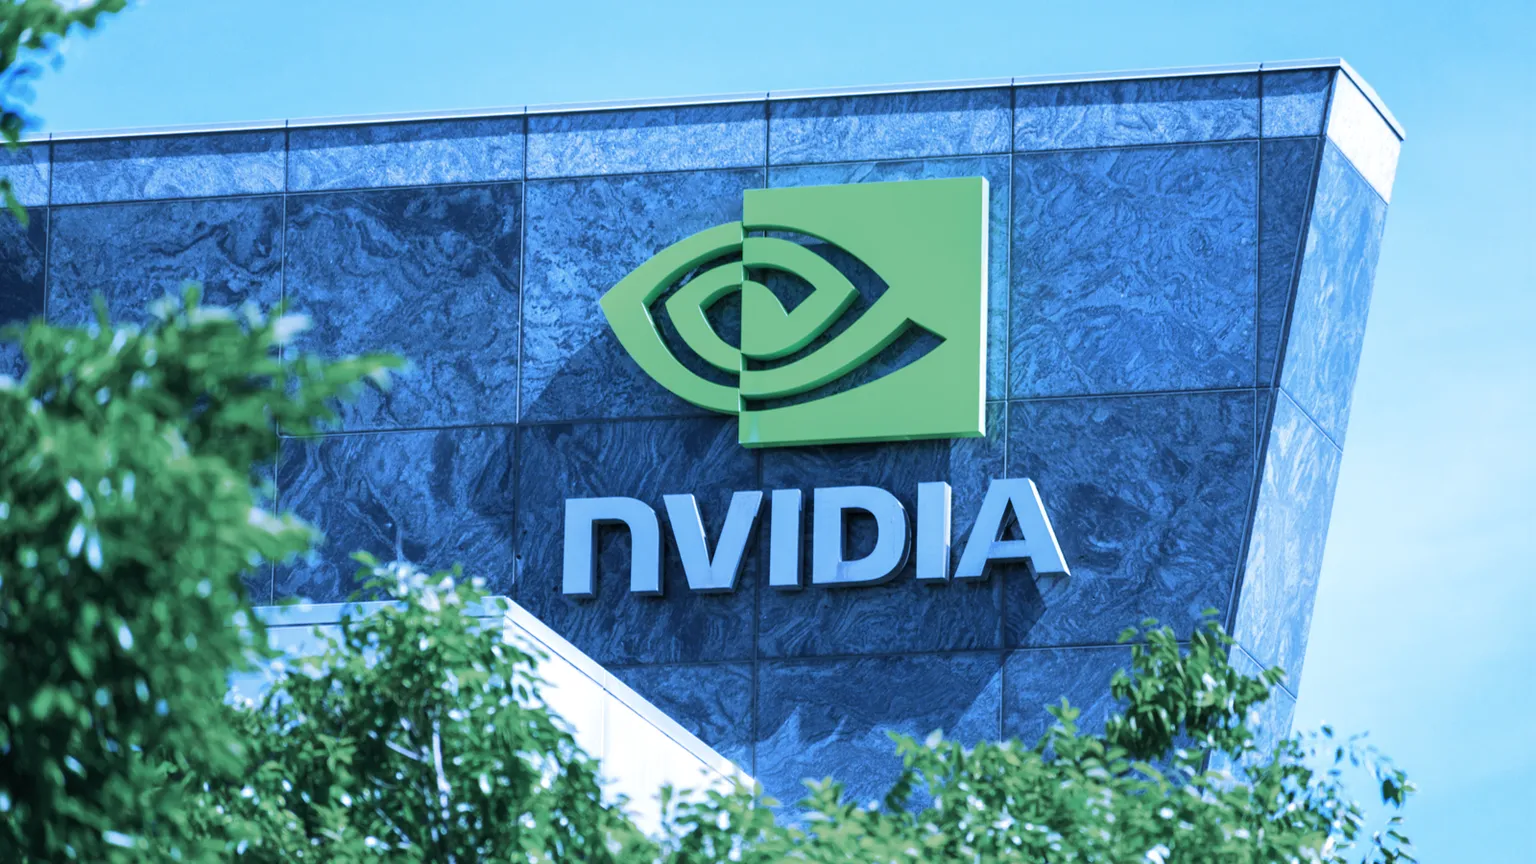 Nvidia is a chips manufacturer that specializes in graphics cards. Image: Shutterstock